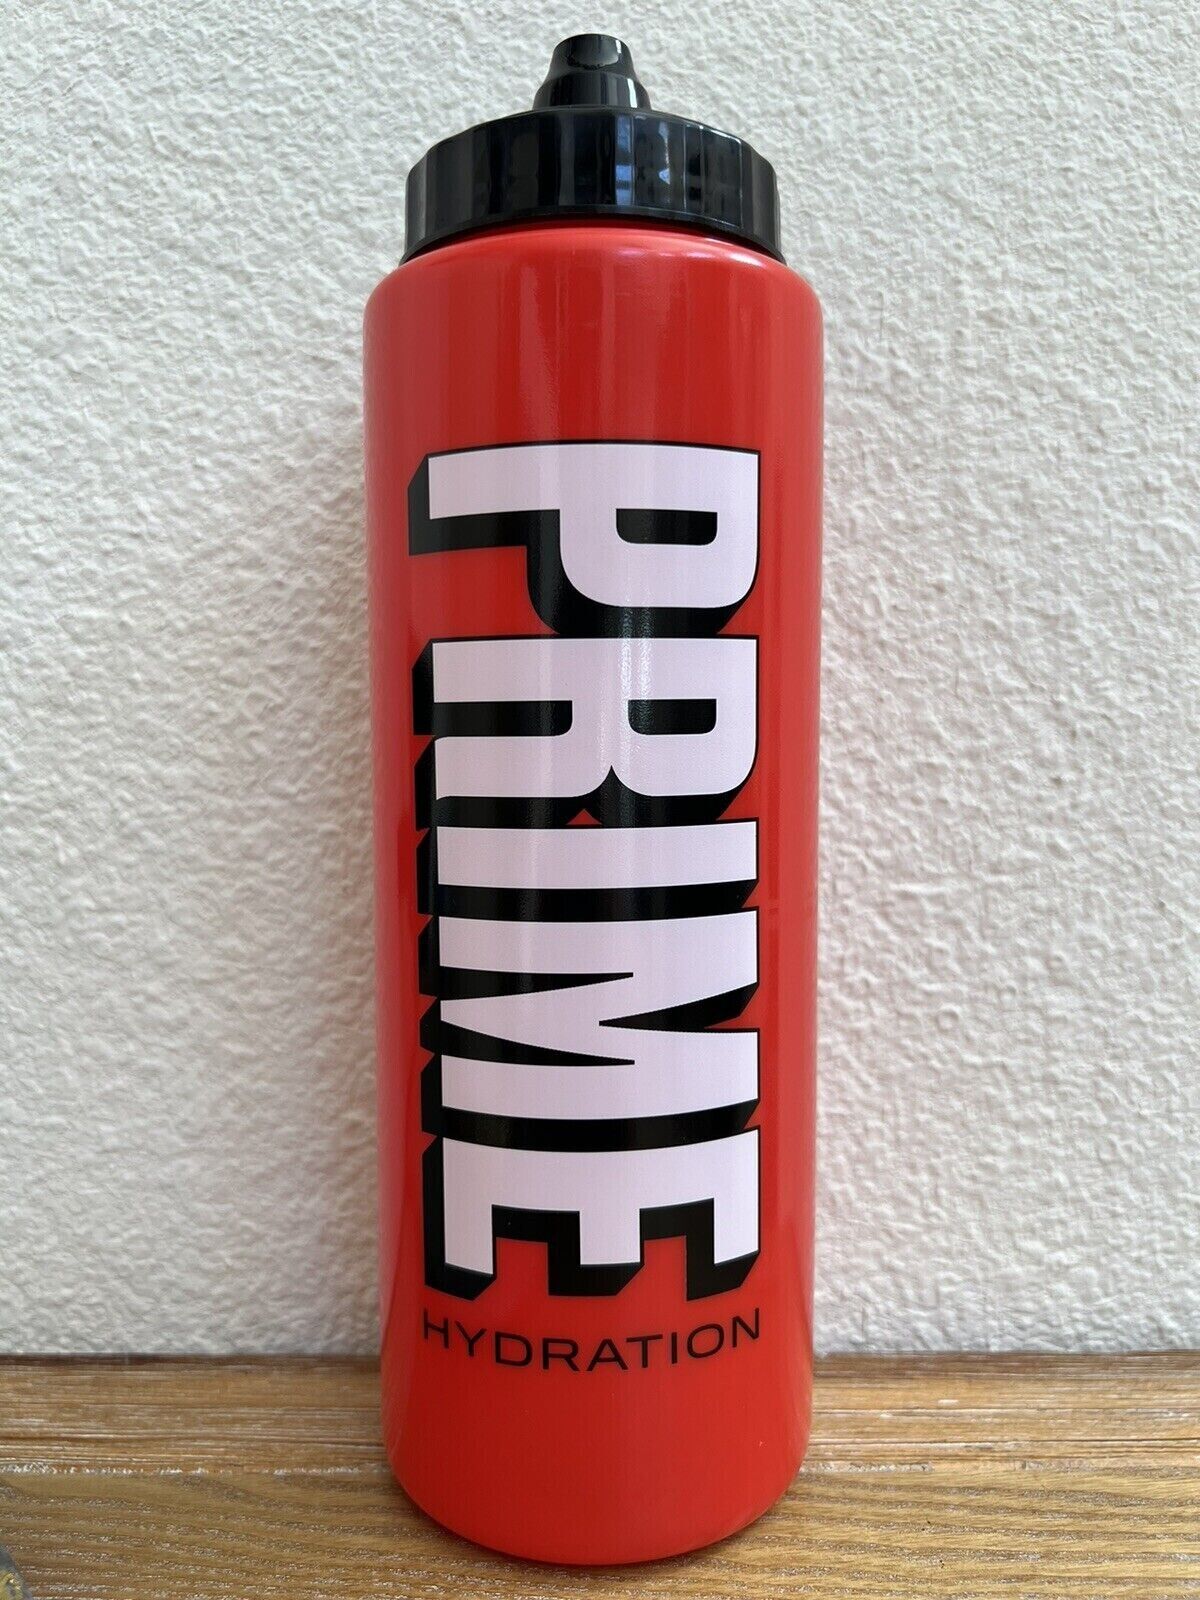 PRIME Hydration Ultra Rare OFFICIAL Promotional 32 Oz Red Water Sport Bottle